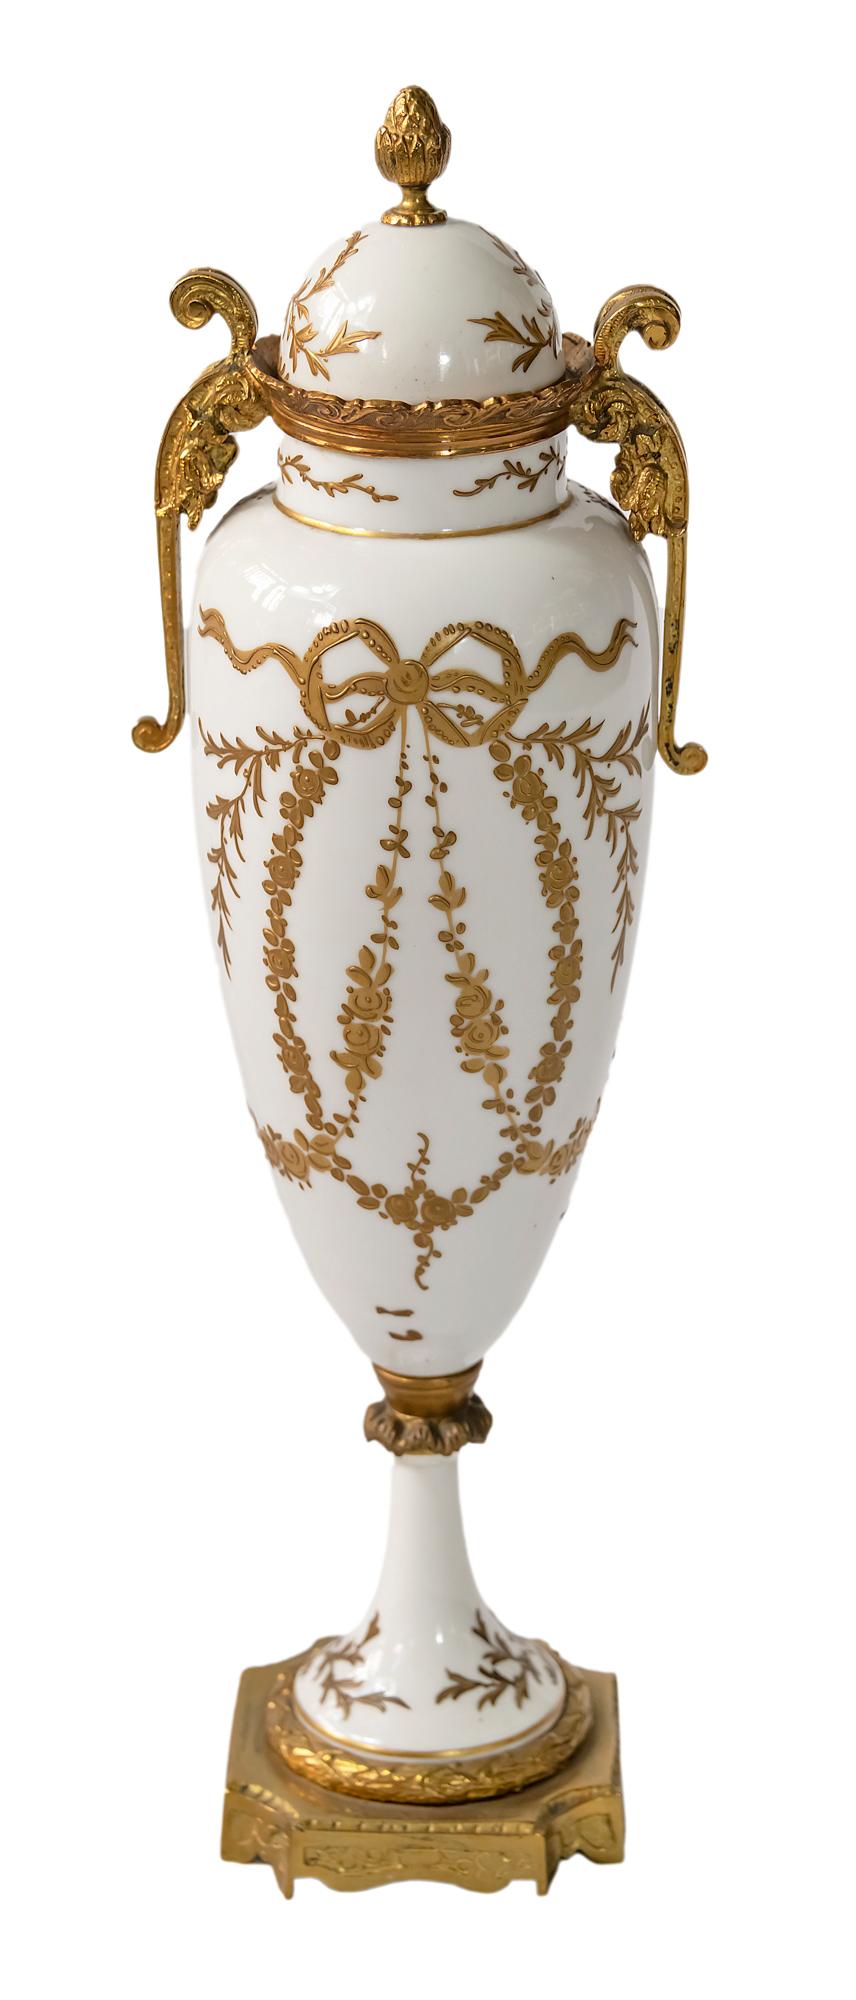 Antique French Servres porcelain vase with hand painted decor and bronze details.
Marked on the bottom and the lid. 